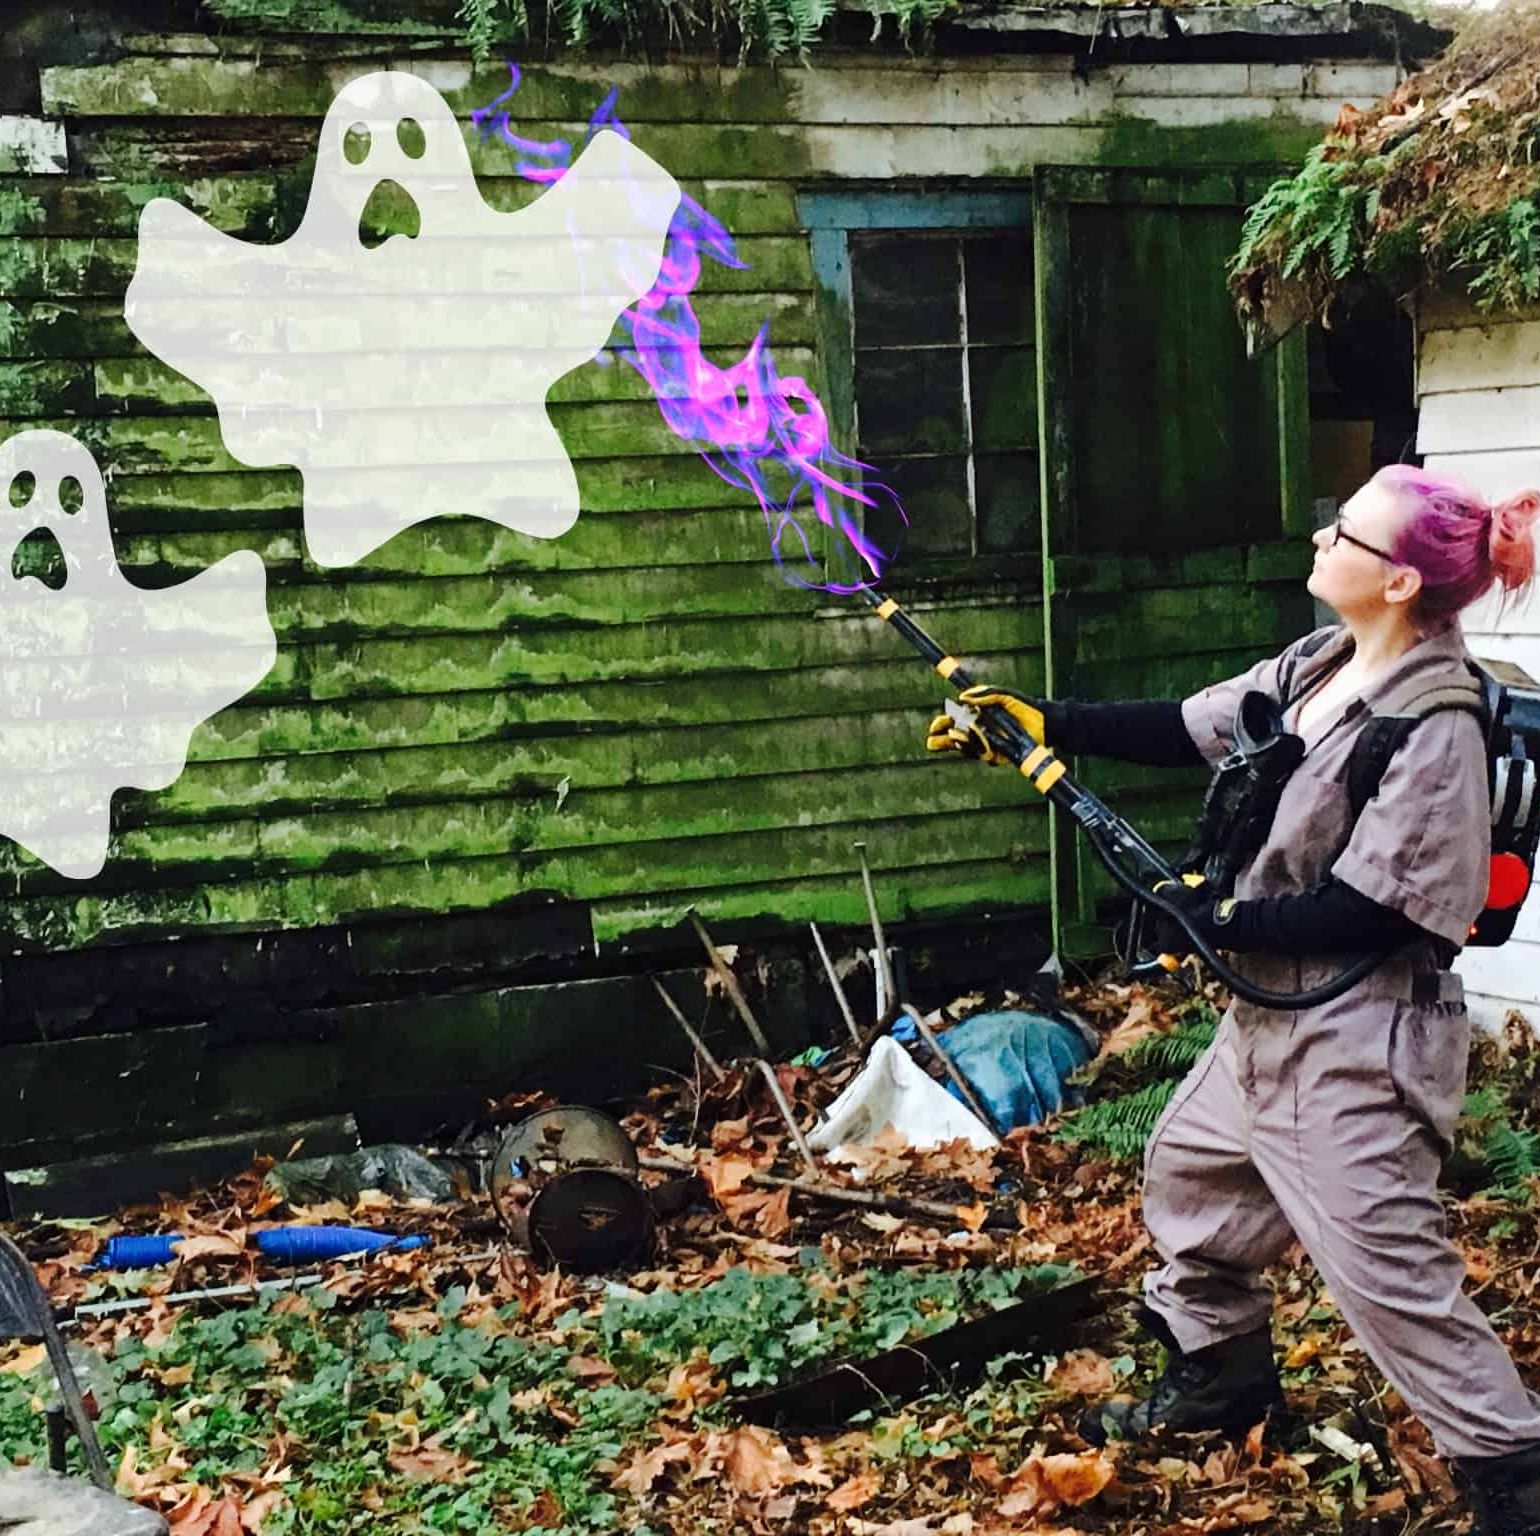 homemade ghostbusters costumes